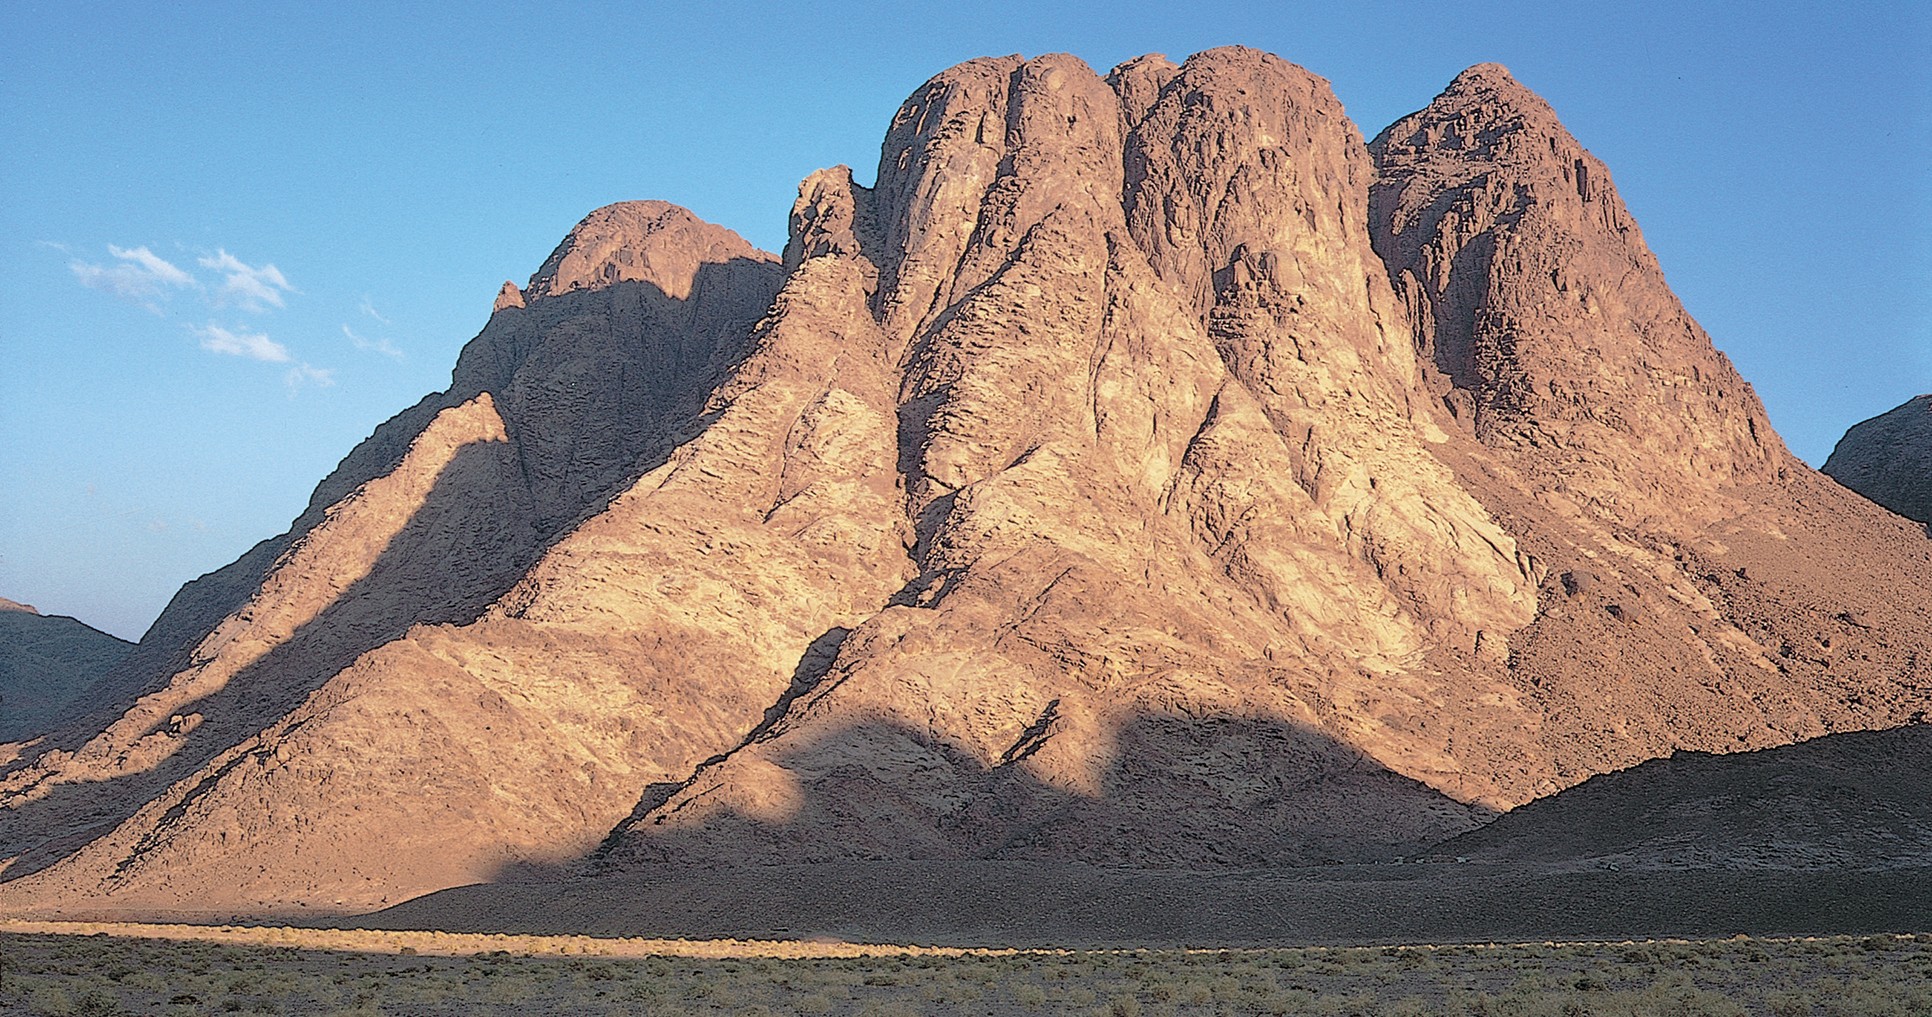 Morning light on a traditional site of Mount Sinai in Egypt.Biblical/Historical info: Near Mount Sinai, Moses watched the flocks of his father-in-law Jethro and saw the burning bush.(See Exodus 3:1 ; 4-17)